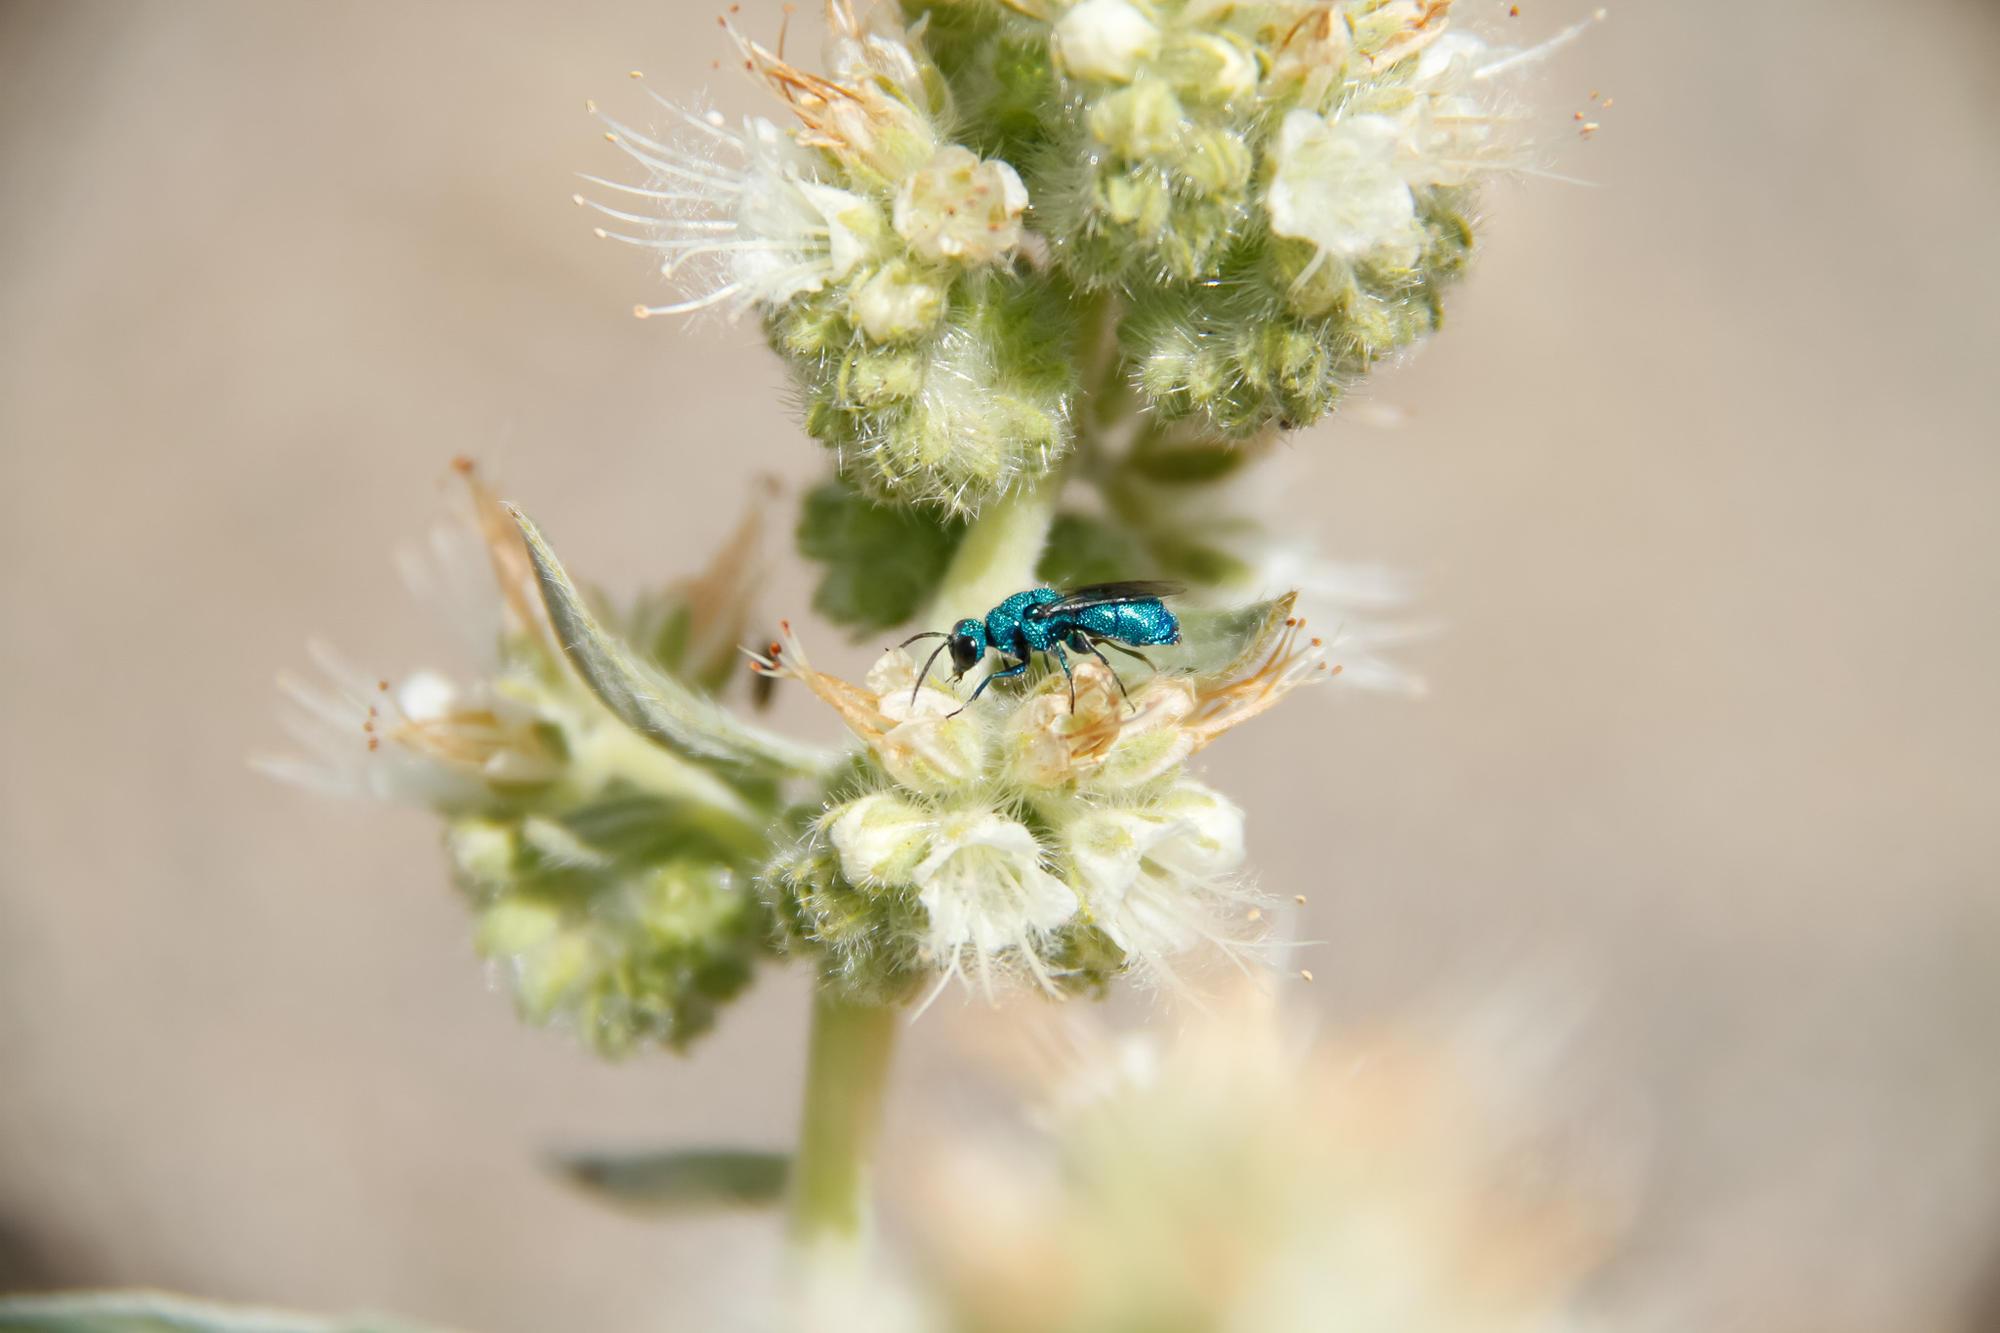 tiny iridescent blue-green wasp on white blossoms